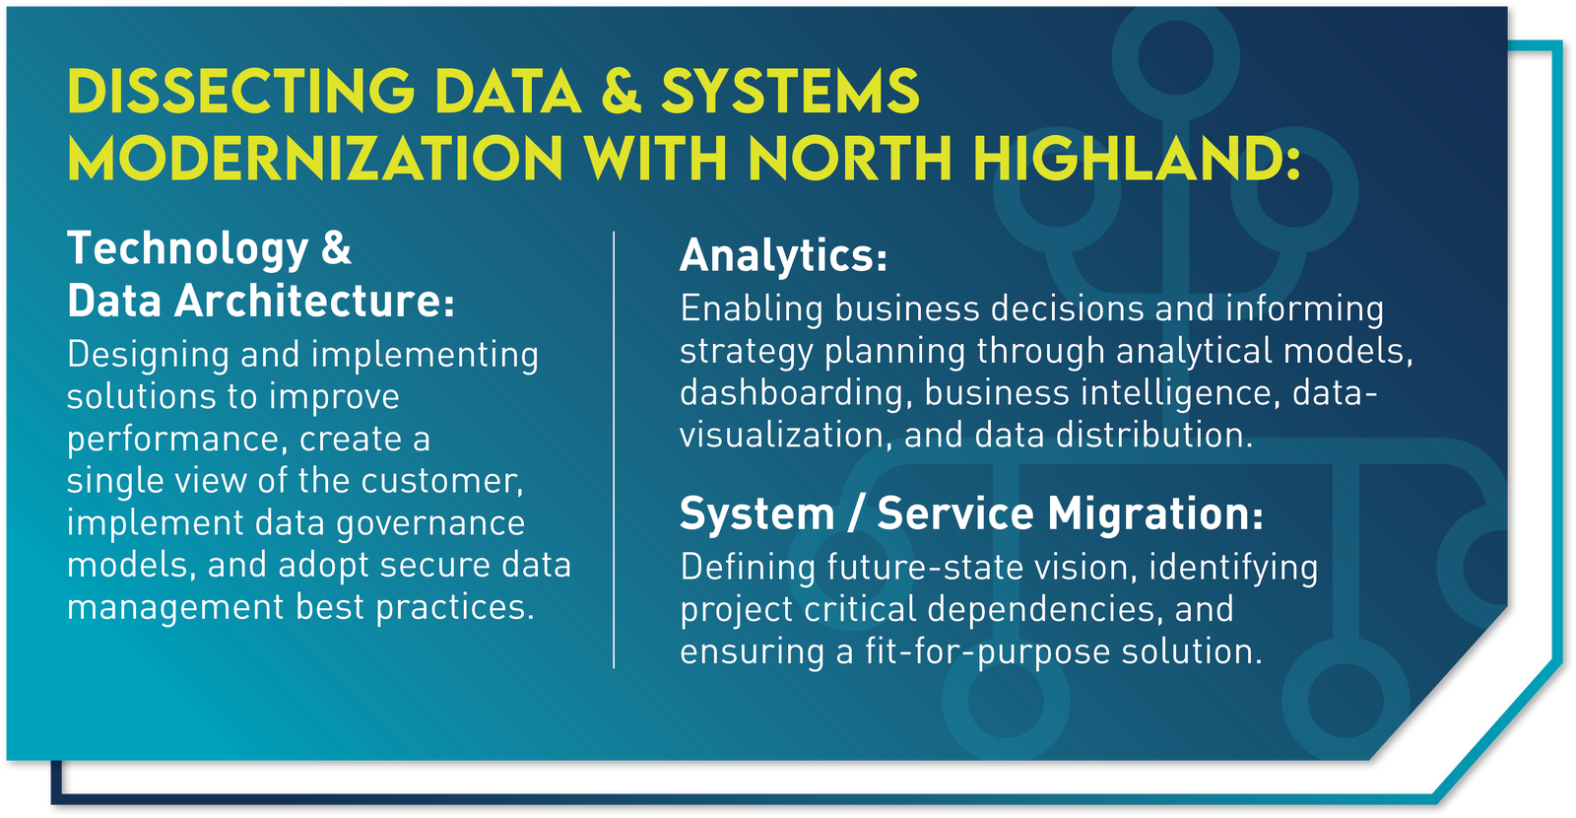 Graphic with text that says: "Dissecting data & systems modernization with North Highland"